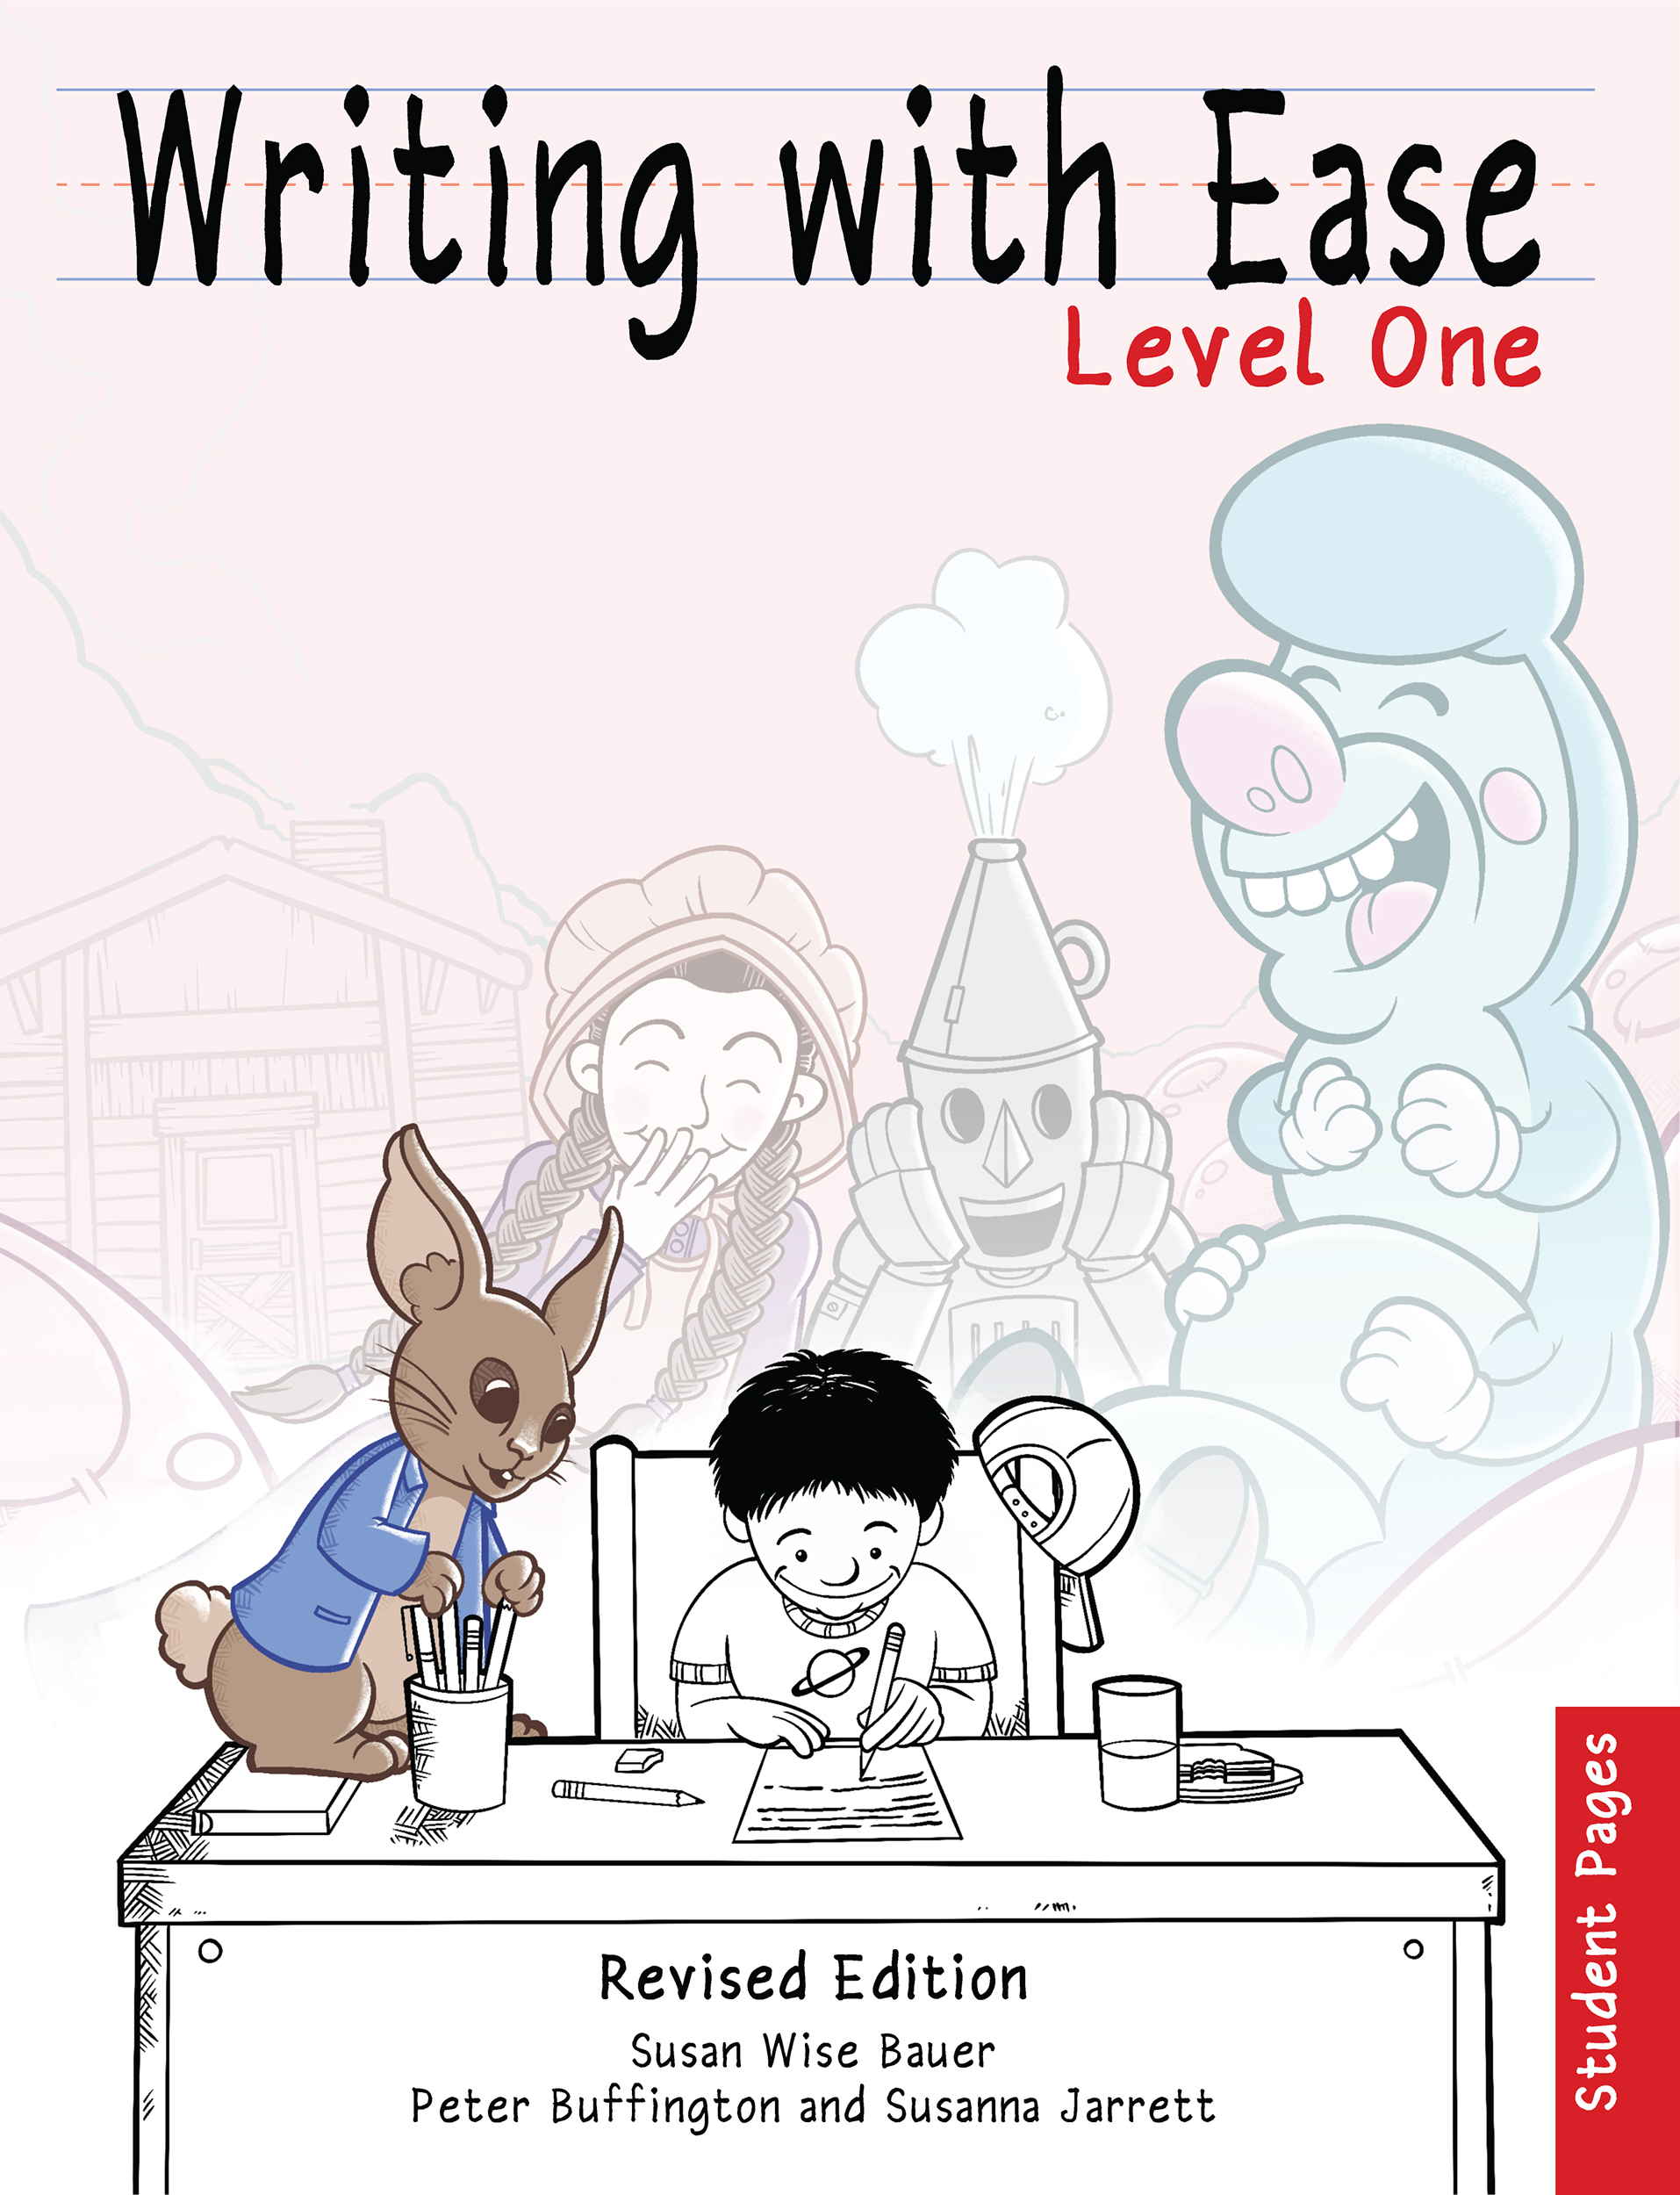 Ease　Revised　Pages,　Well-Trained　Level　Student　Writing　Mind　With　Edition